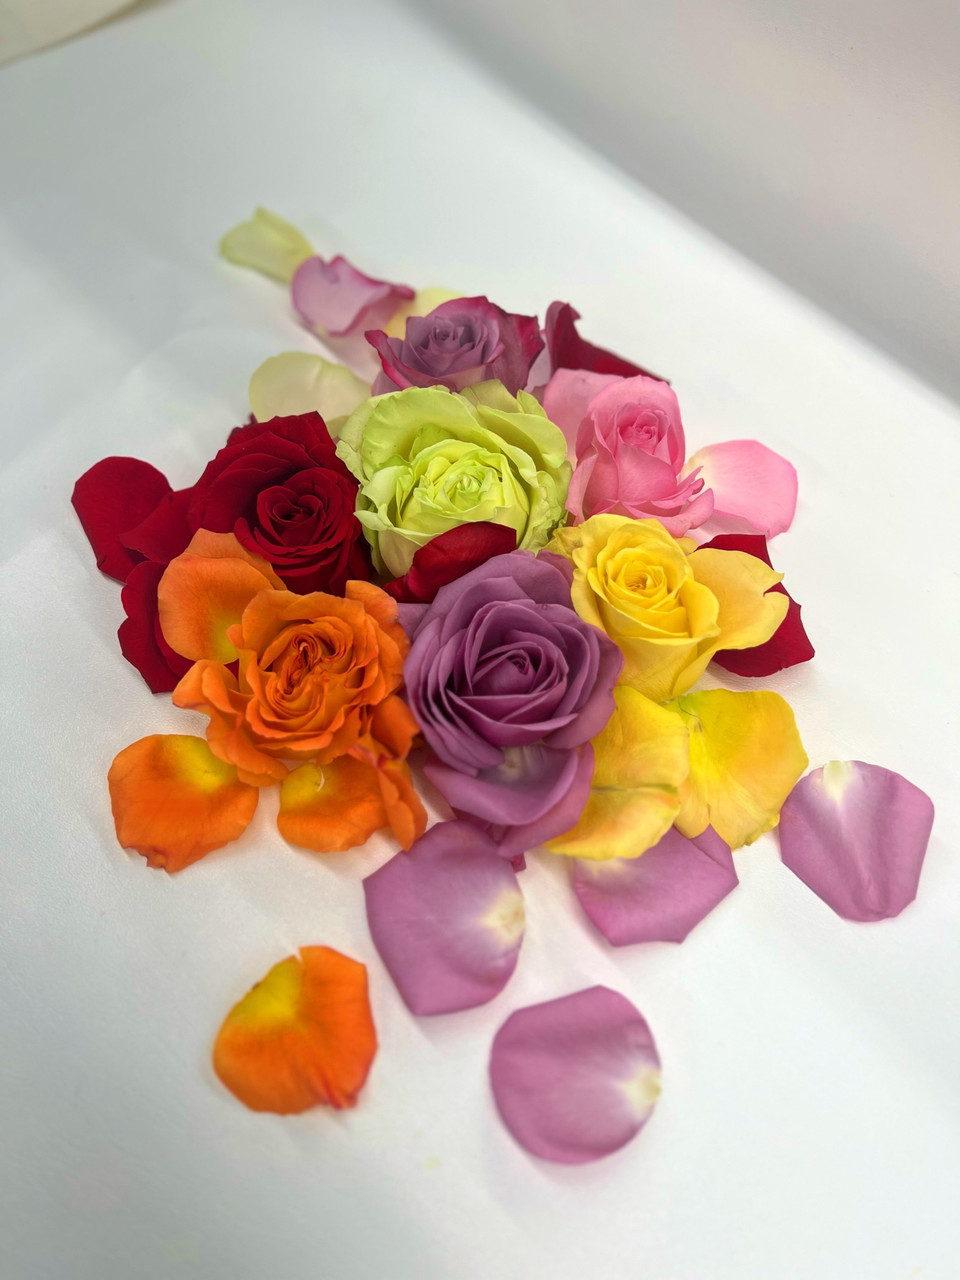 Experience Ultimate Relaxation With A Rose Petal Bath